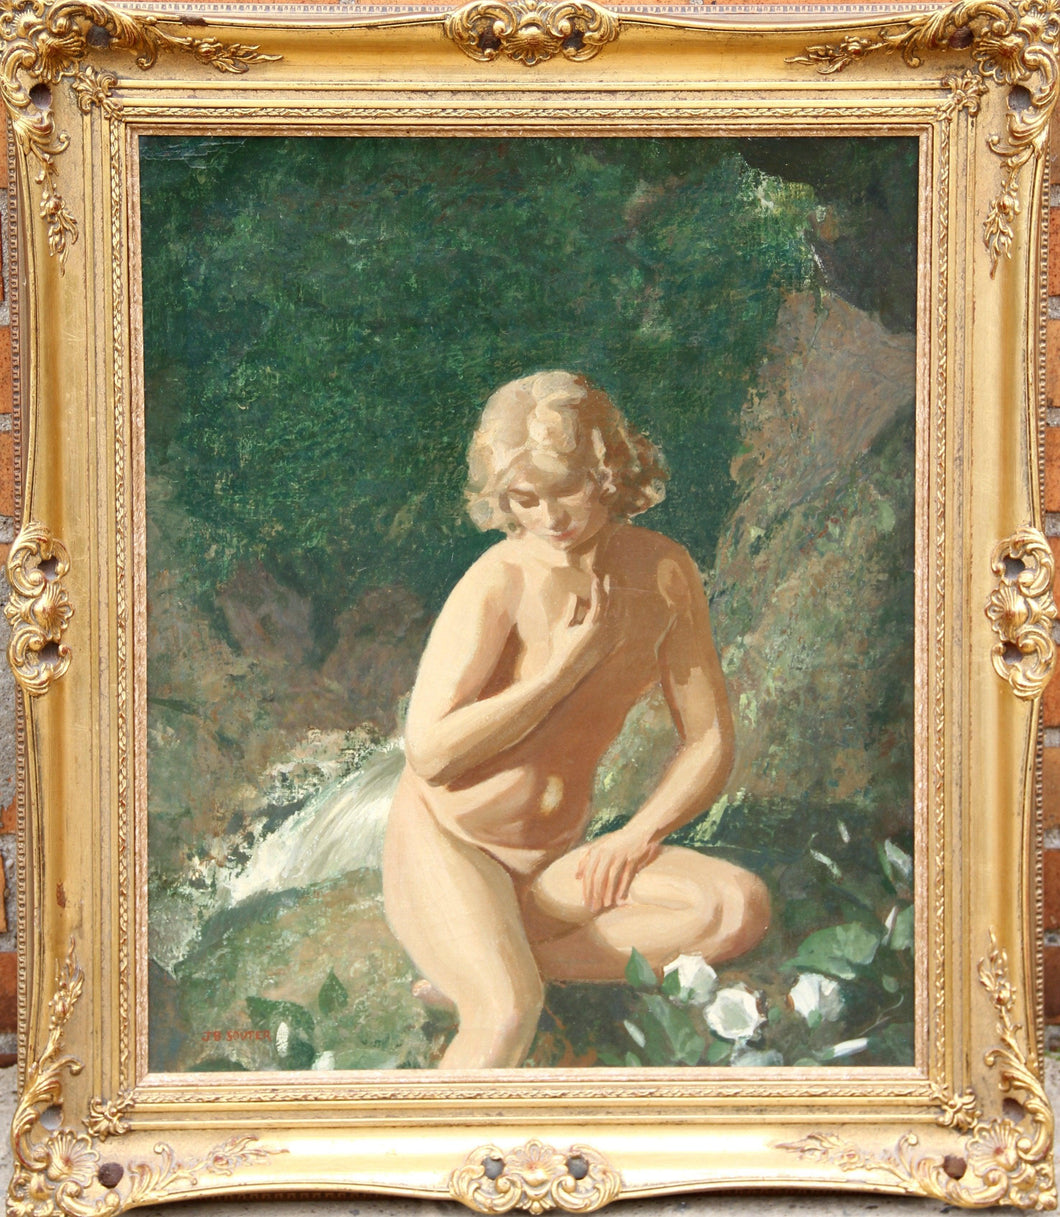 Seated Nude by Waterfall Oil | John Bulloch Souter,{{product.type}}